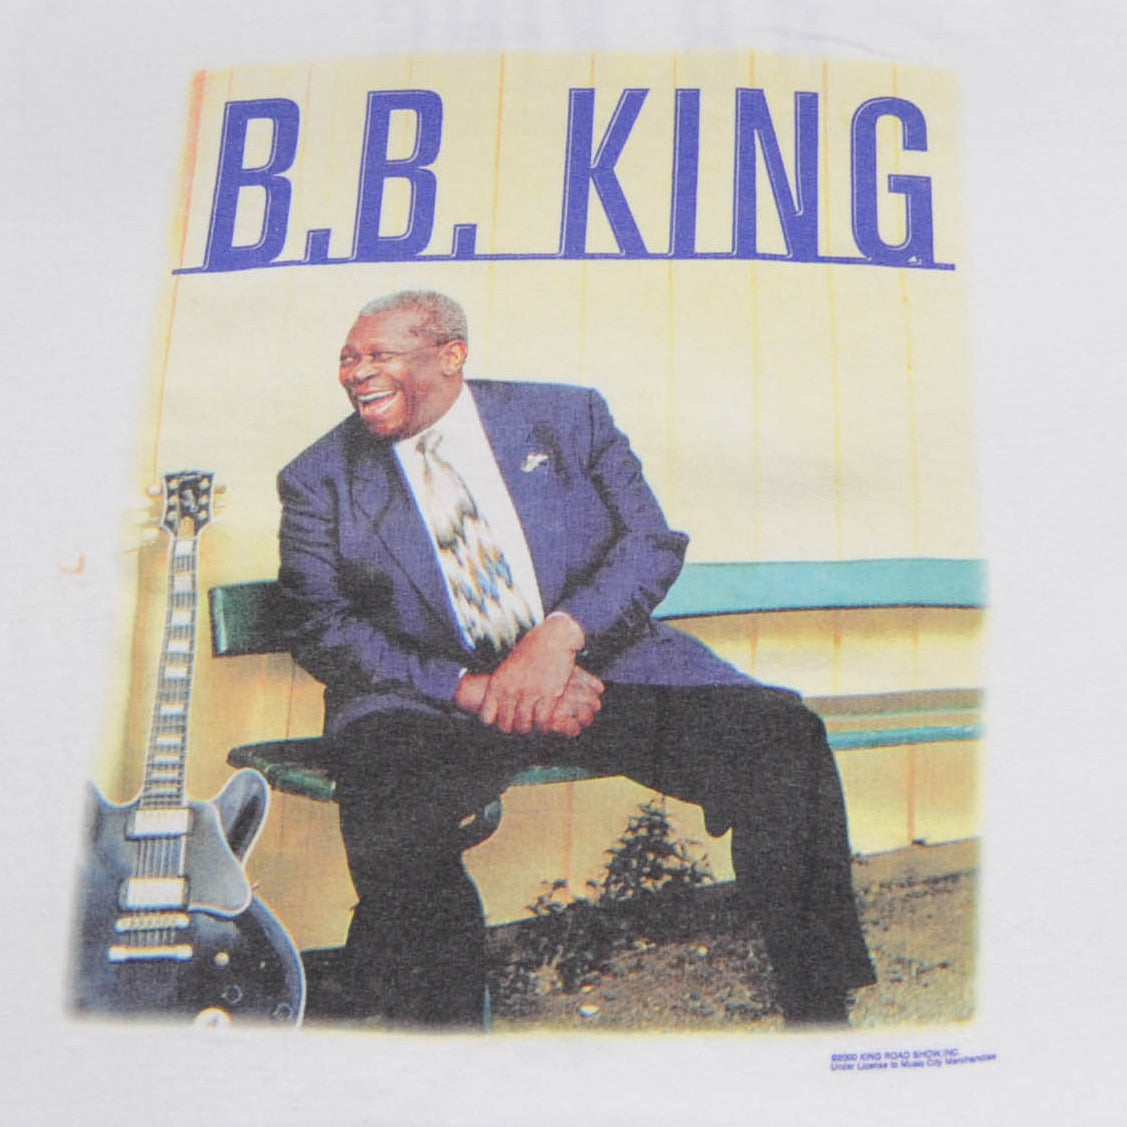 00's BB.king Tシャツ (M)/A2658T-S